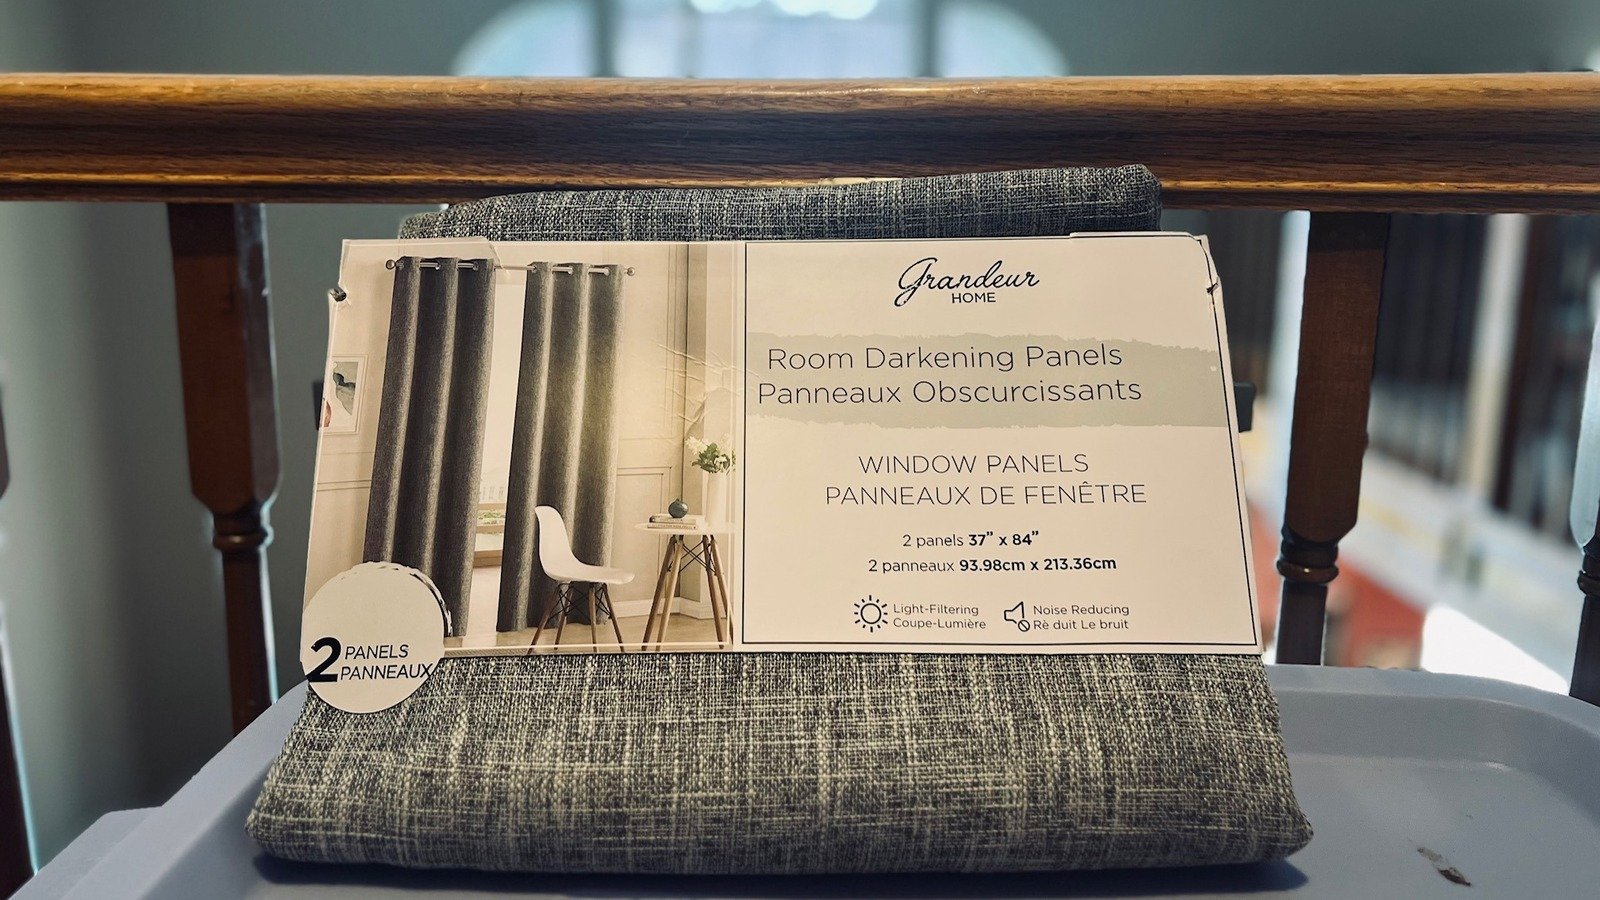 We Tried The Cheapest Room-Darkening Curtains At HomeGoods. Here's How It Went